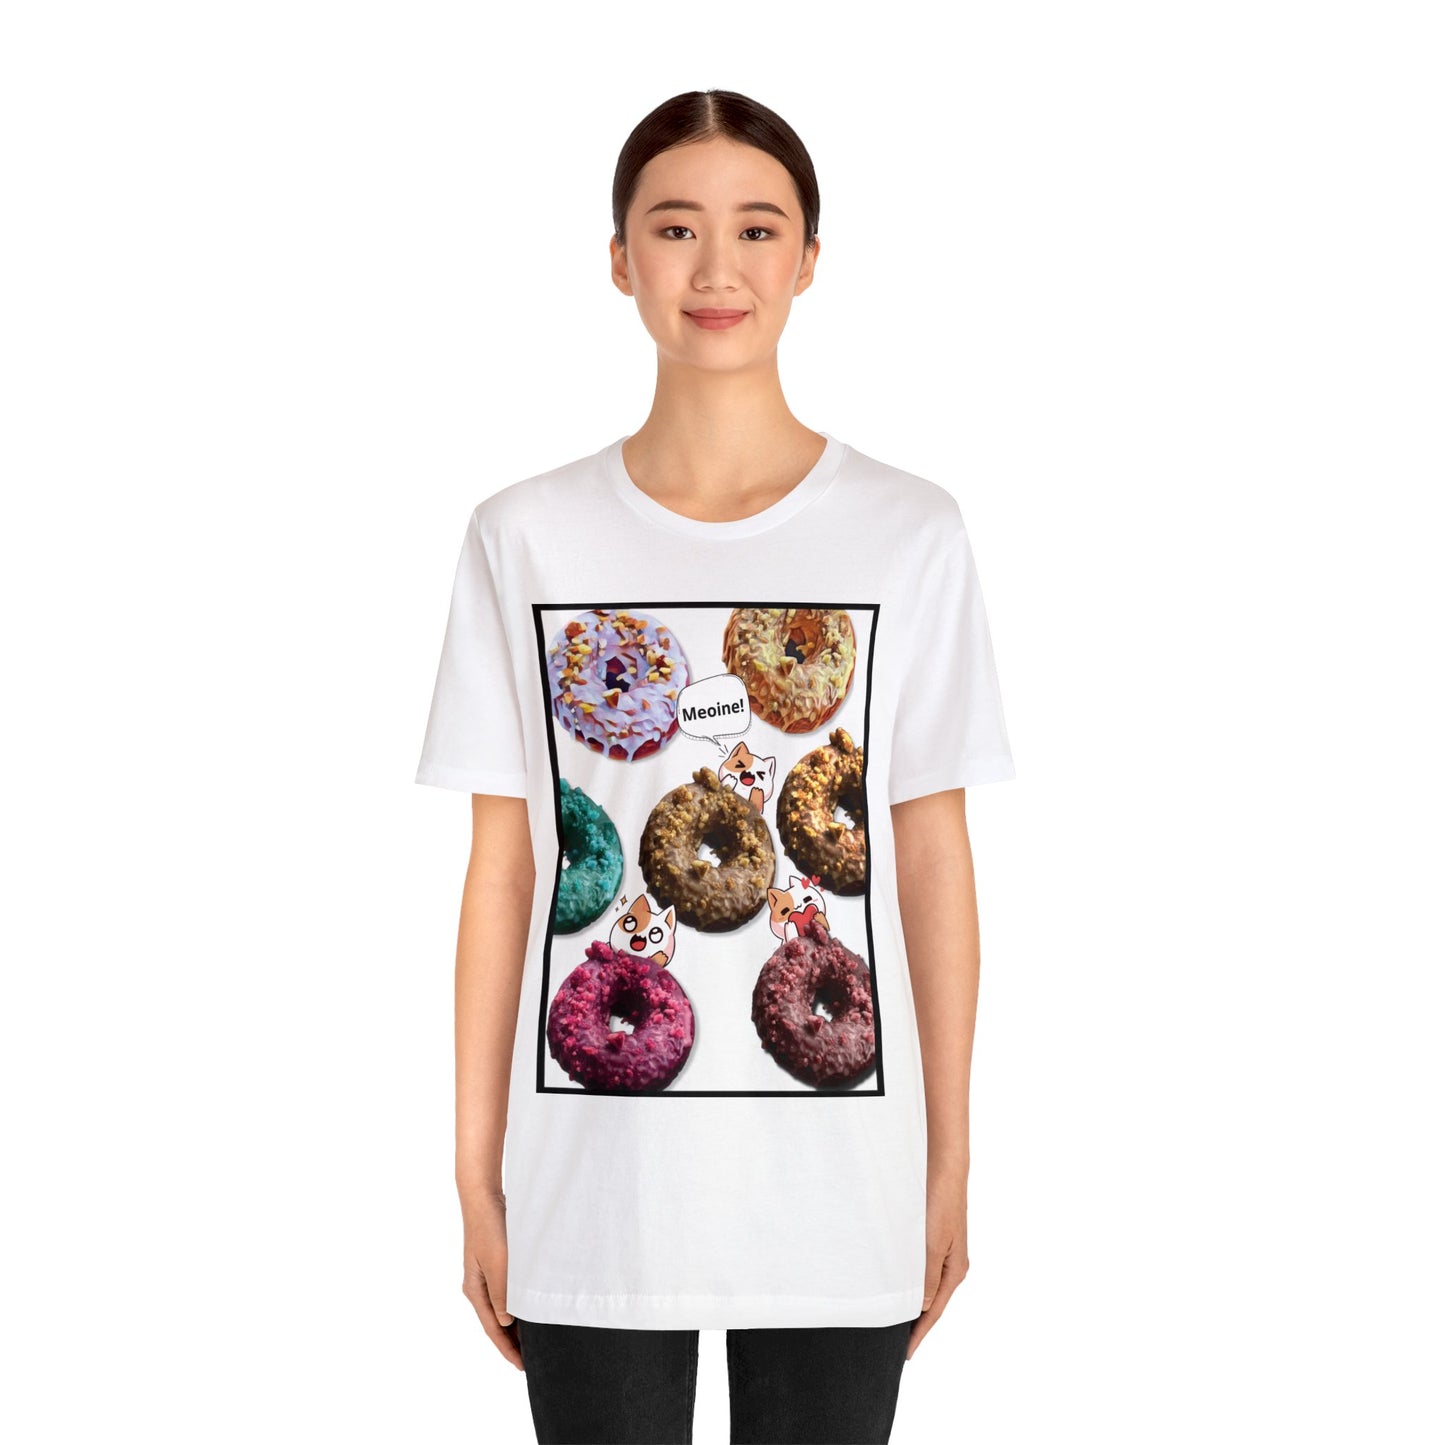 Kitten and Donuts T-Shirt